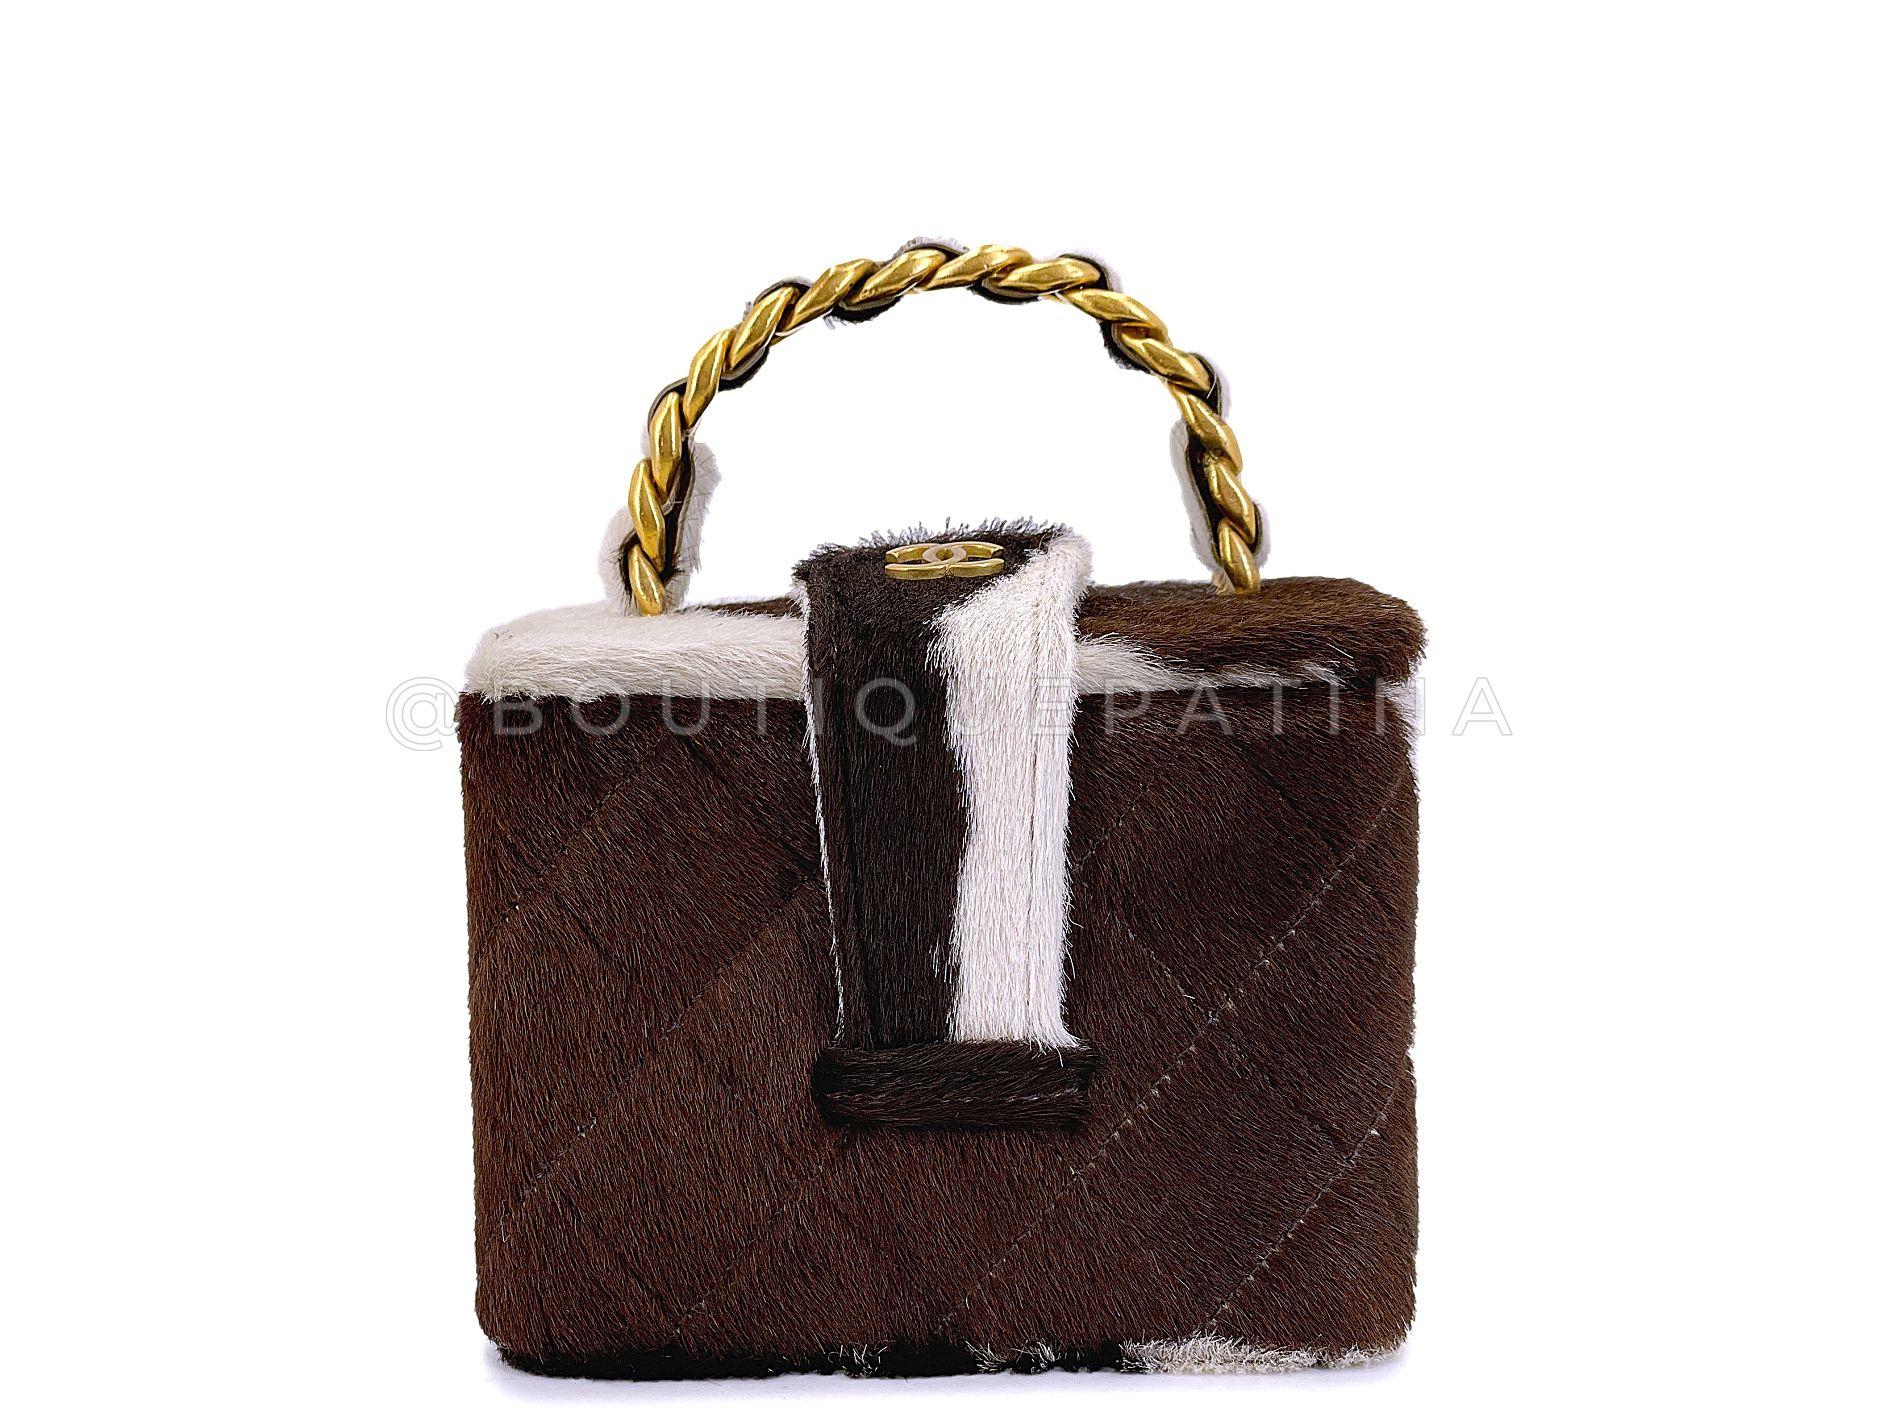 Store item: 67912
This Rare Chanel Vintage Cow Print Pony Hair Mini Cube Vanity Case Bag is a collector's holy grail. This is a vintage classic. Produced in 1995, almost 30 years old and in stunning condition.

A small cube-shaped vanity made of